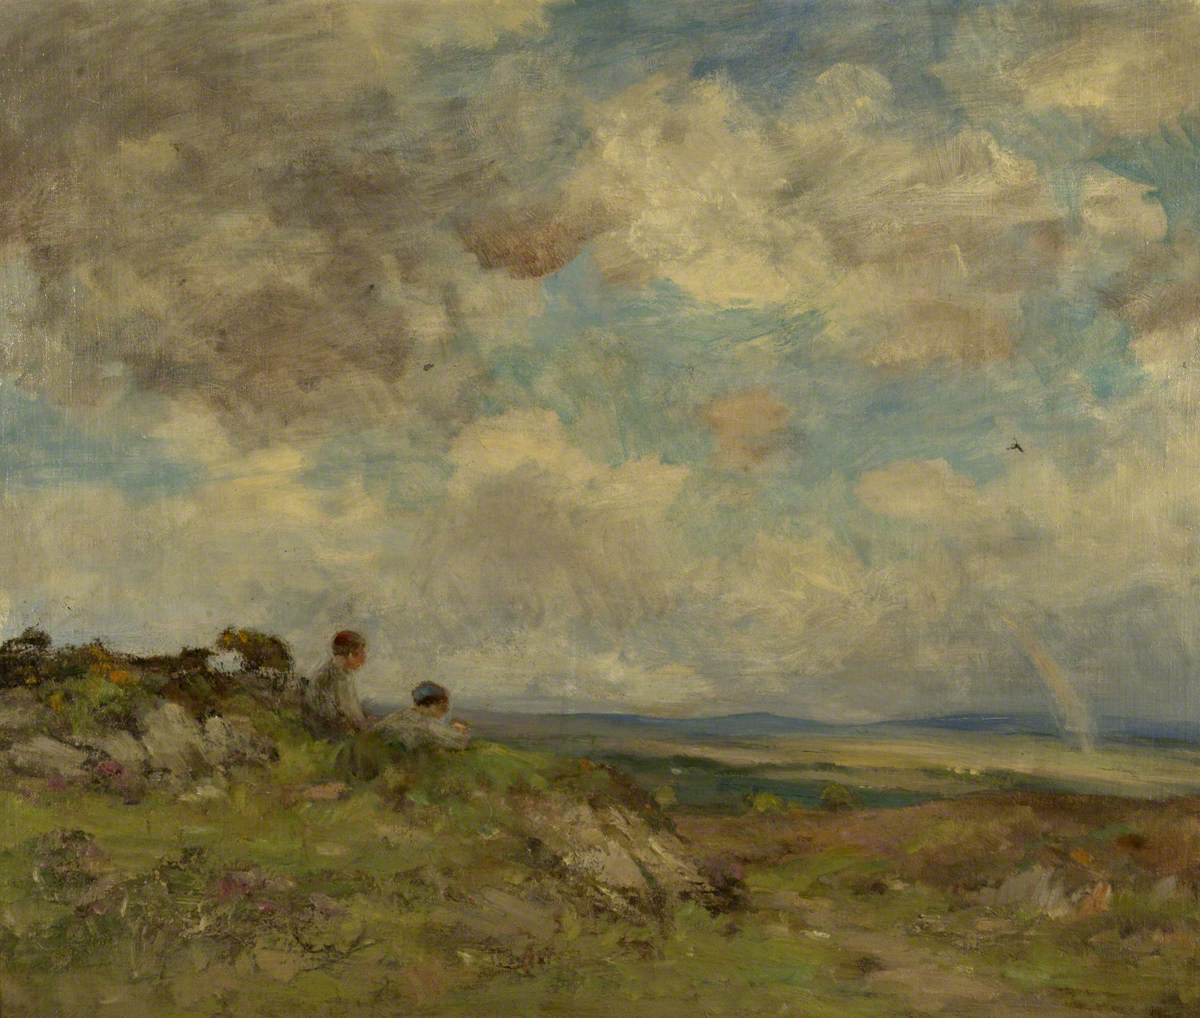 Landscape with Children Watching a Distant Rainbow